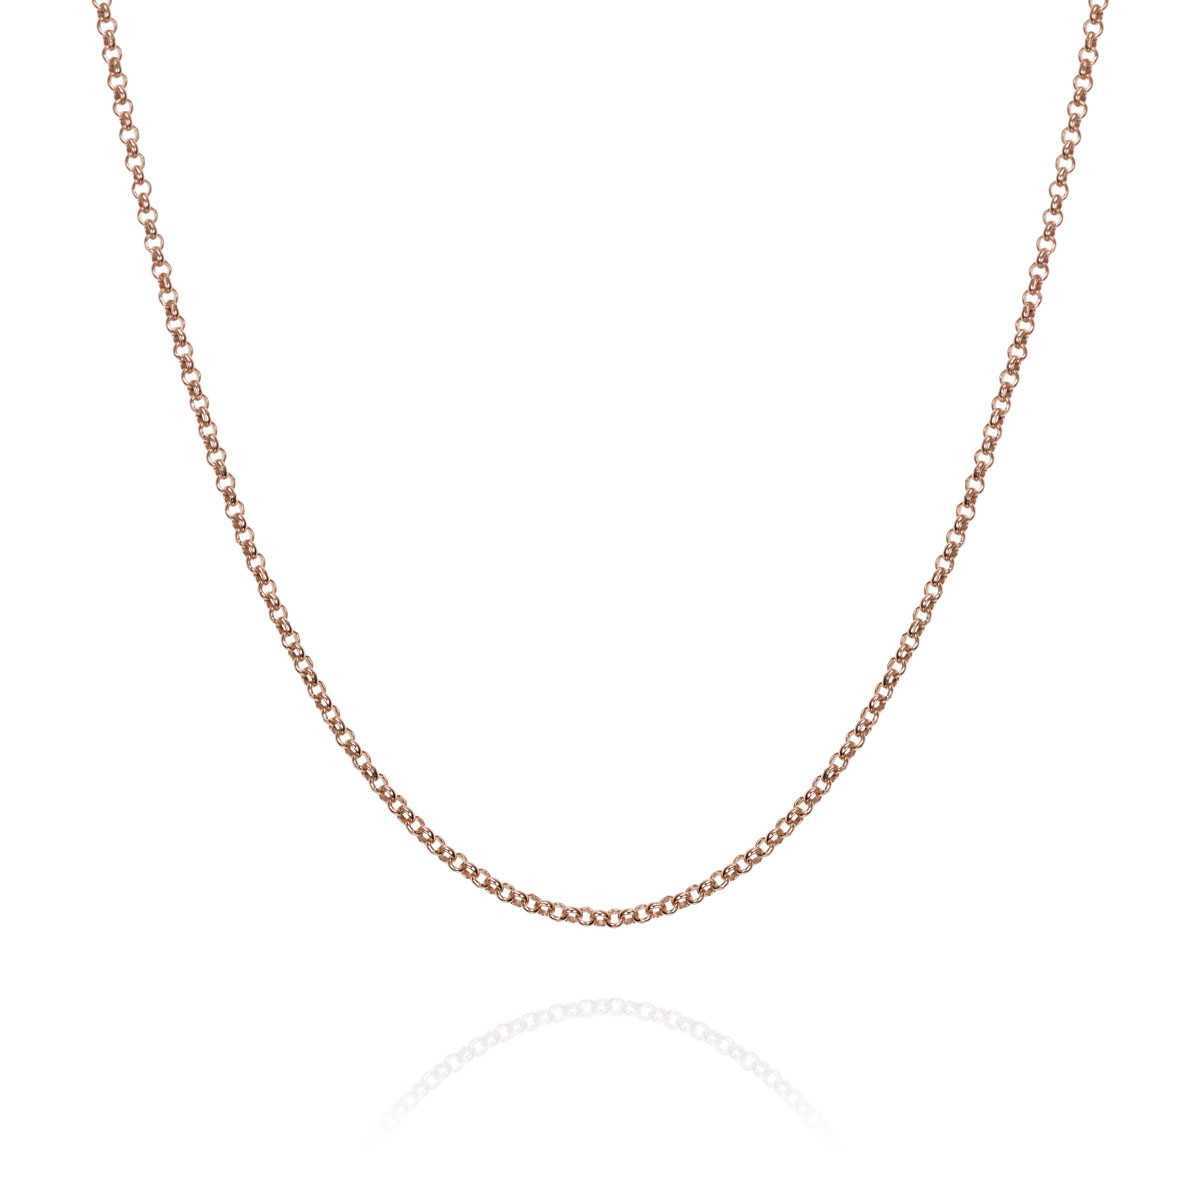 Chain in Silver 40 cm. Rose Gold